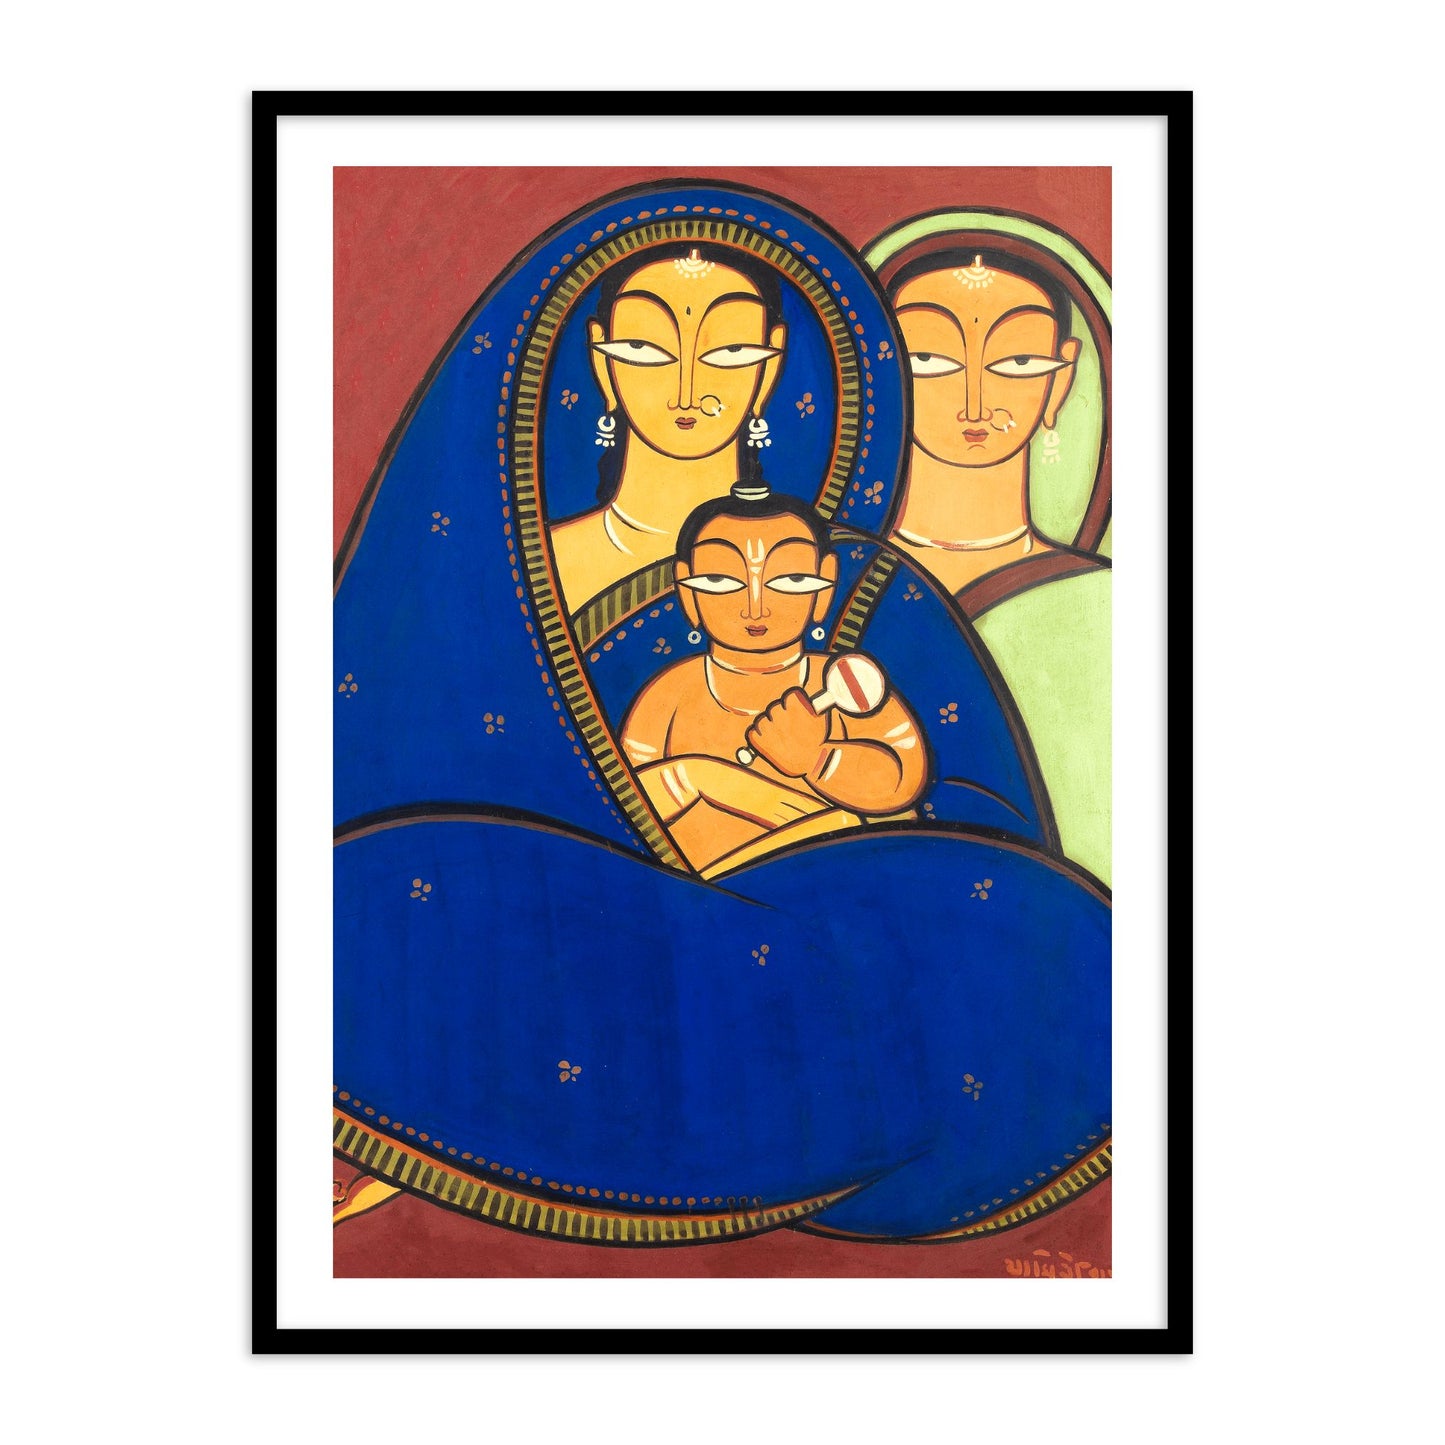 Mother with Child & Woman Wall Art Painting Print by Jamini Roy for Home Decor